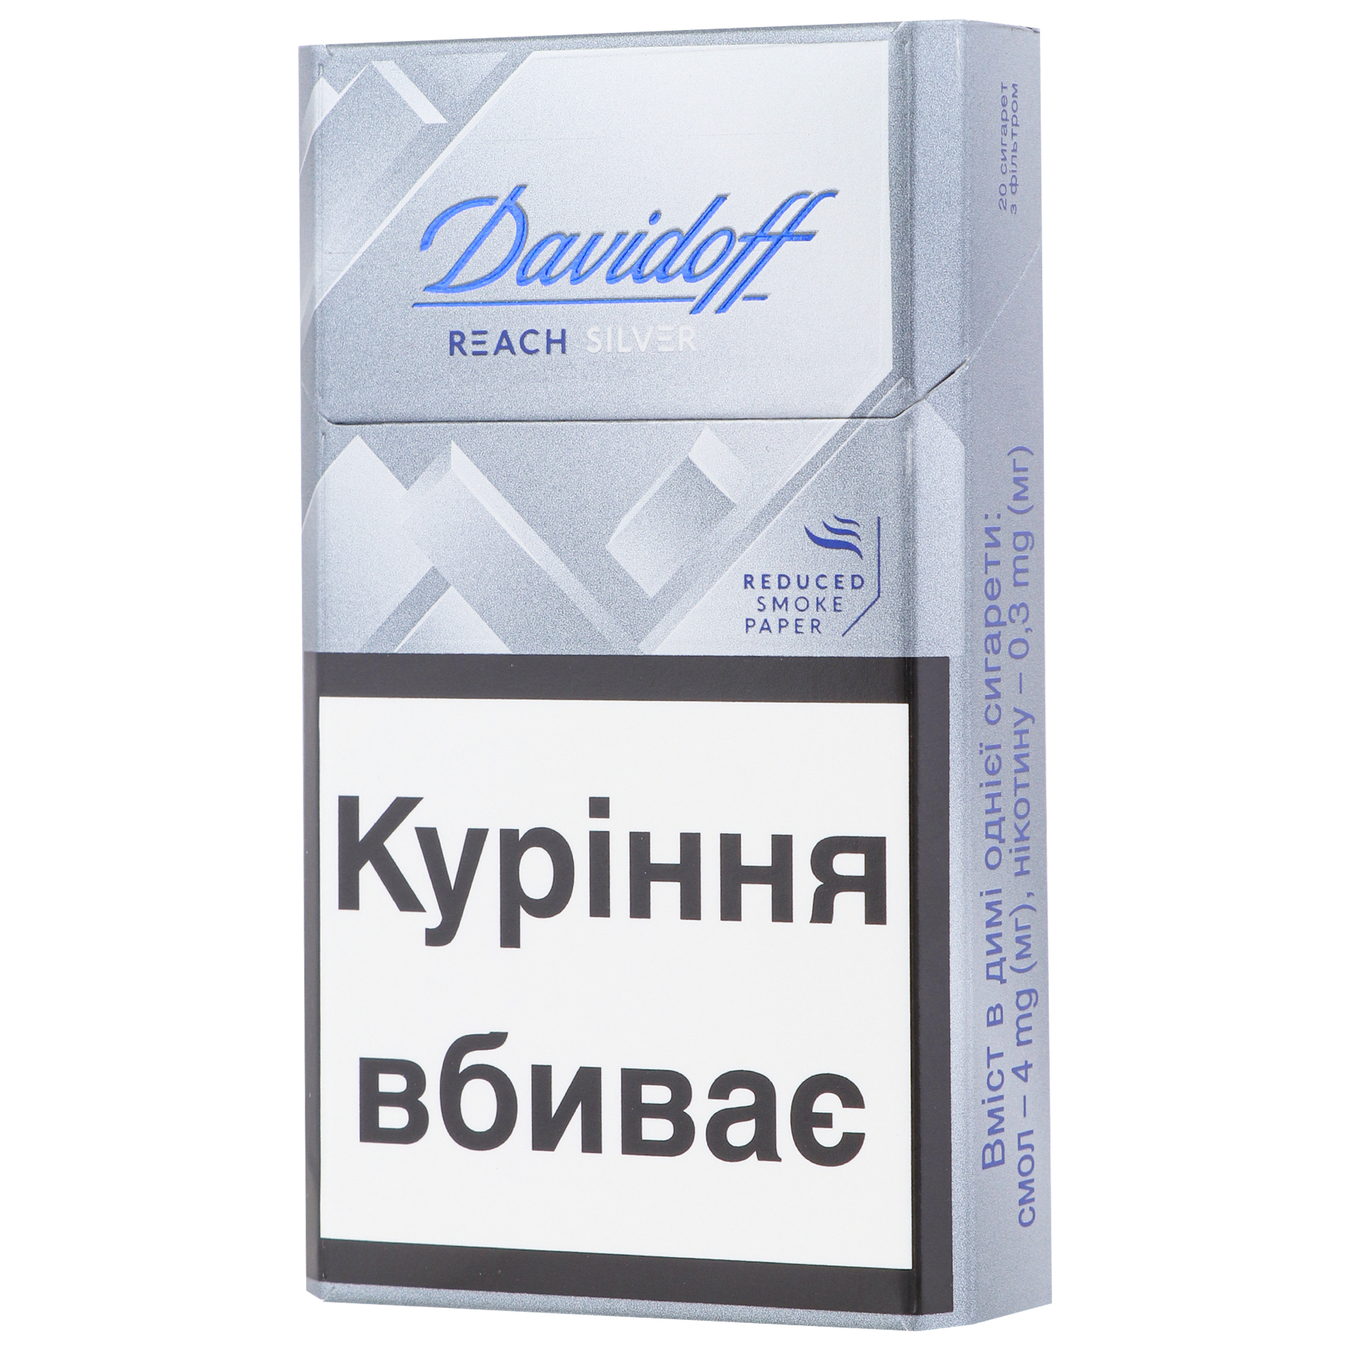 Davidoff Reach SILVER cigarettes 20 pcs (the price is indicated without excise tax) 5